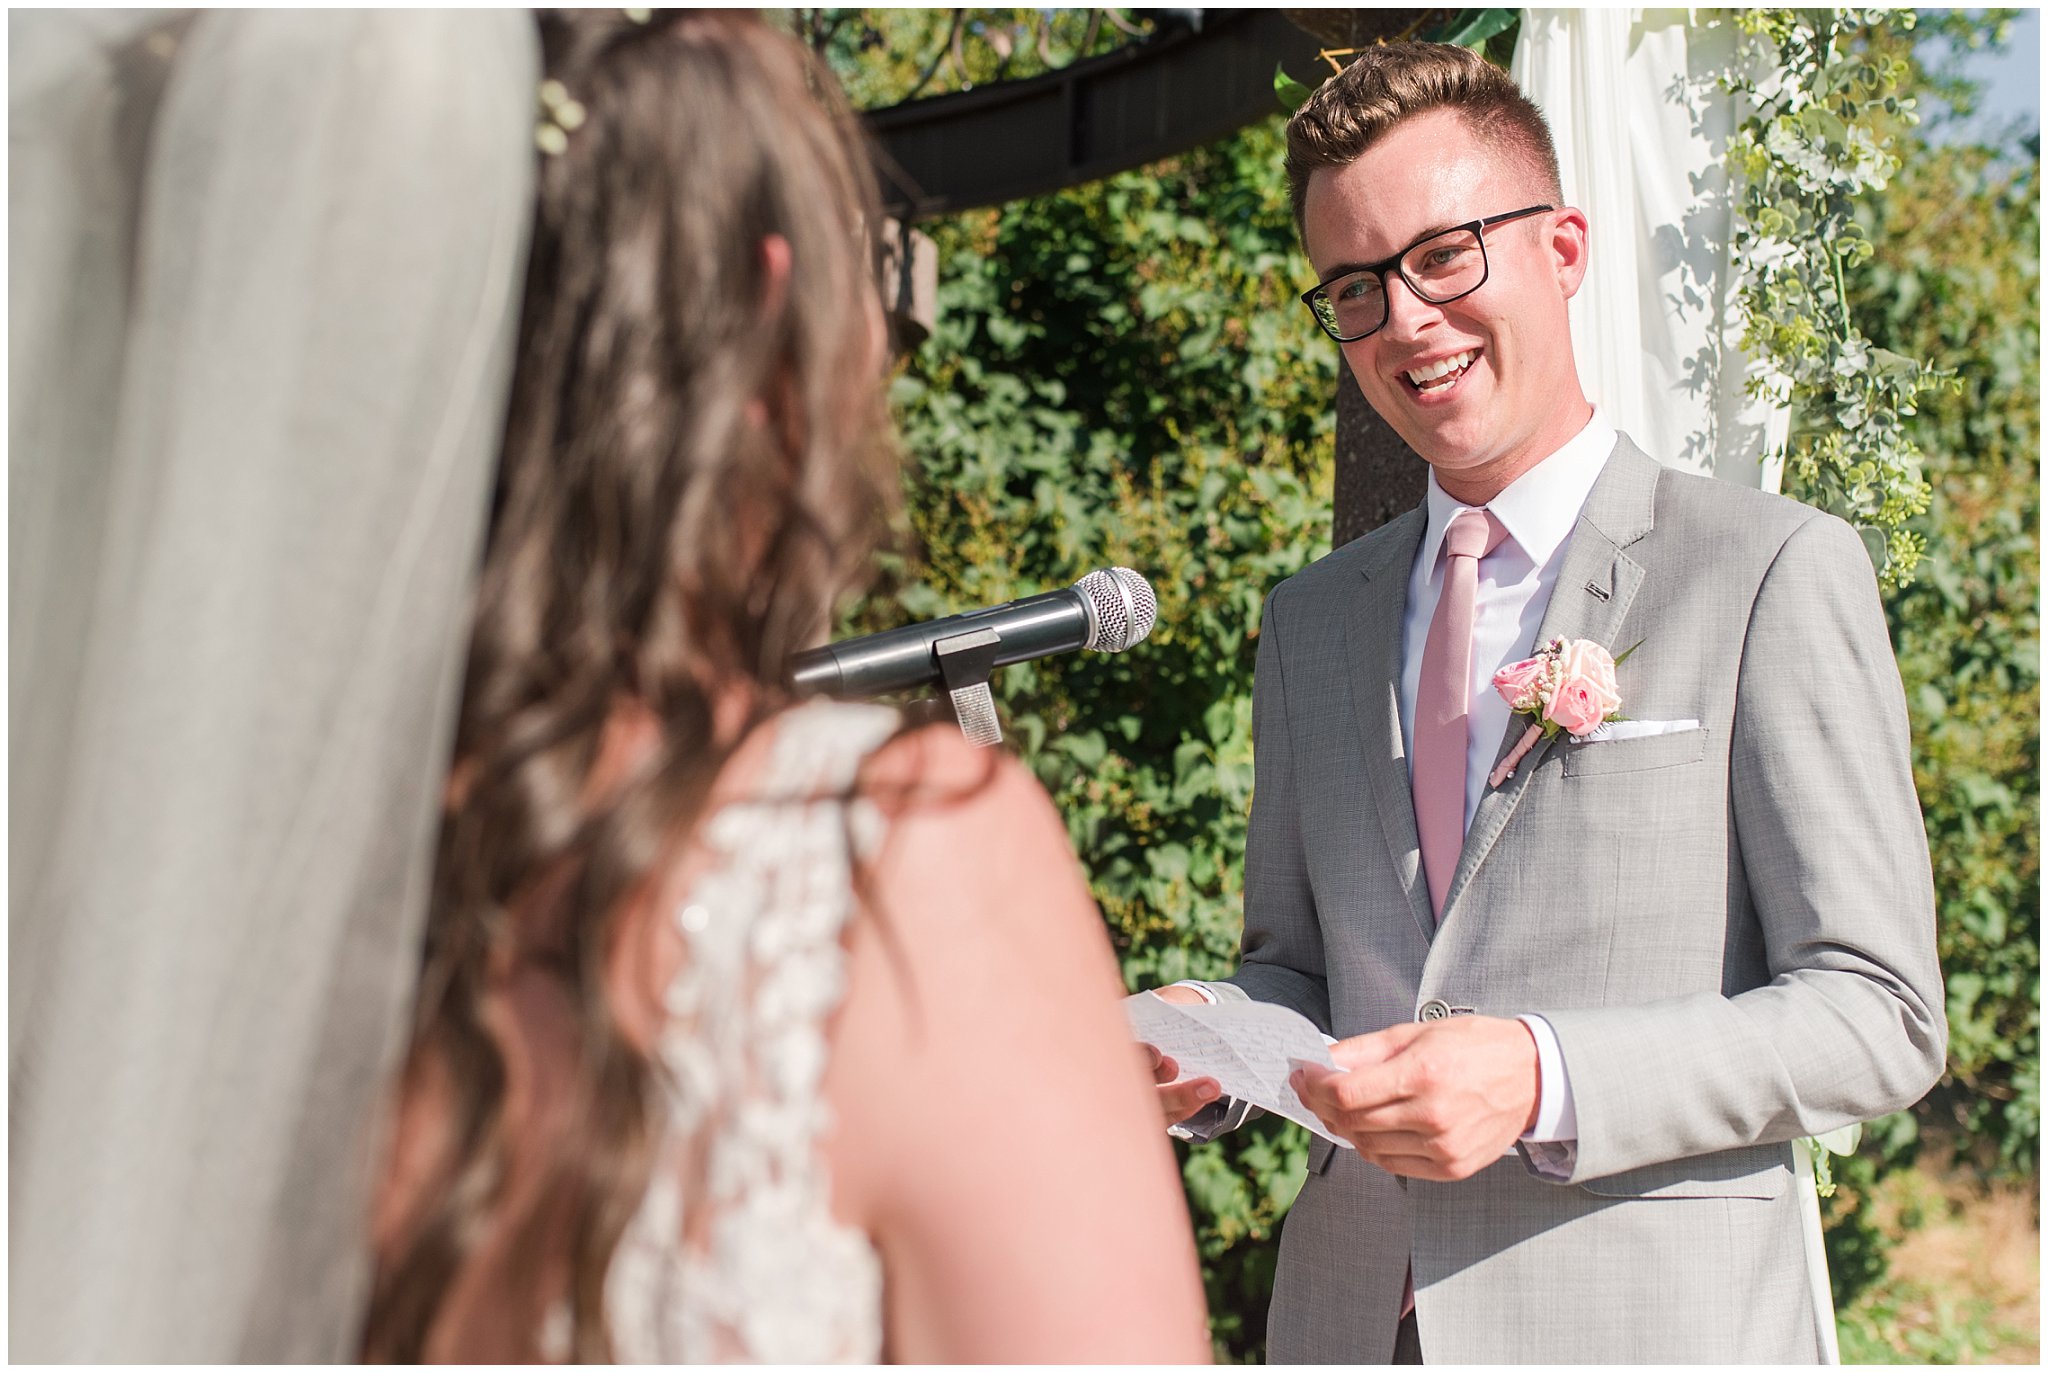 Groom reacts to vows during ceremony | Oak Hills Utah Dusty Rose and Gray Summer Wedding | Jessie and Dallin Photography